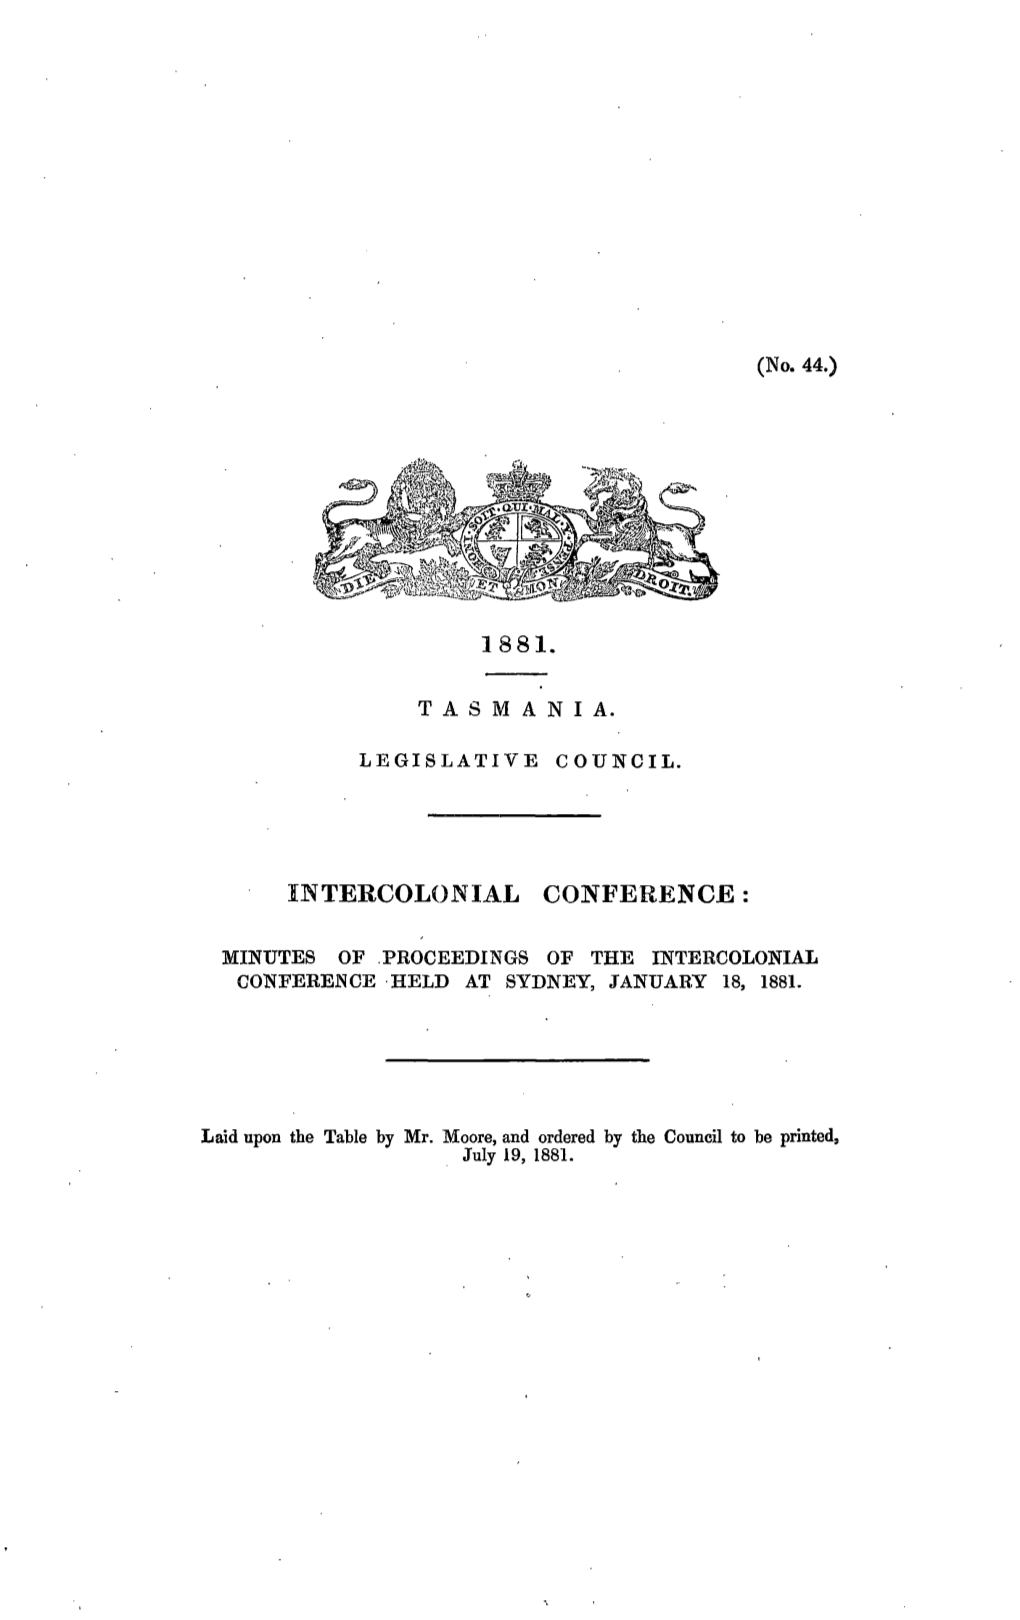 Minutes of Proceedings of the Intercolonial Conference Held At